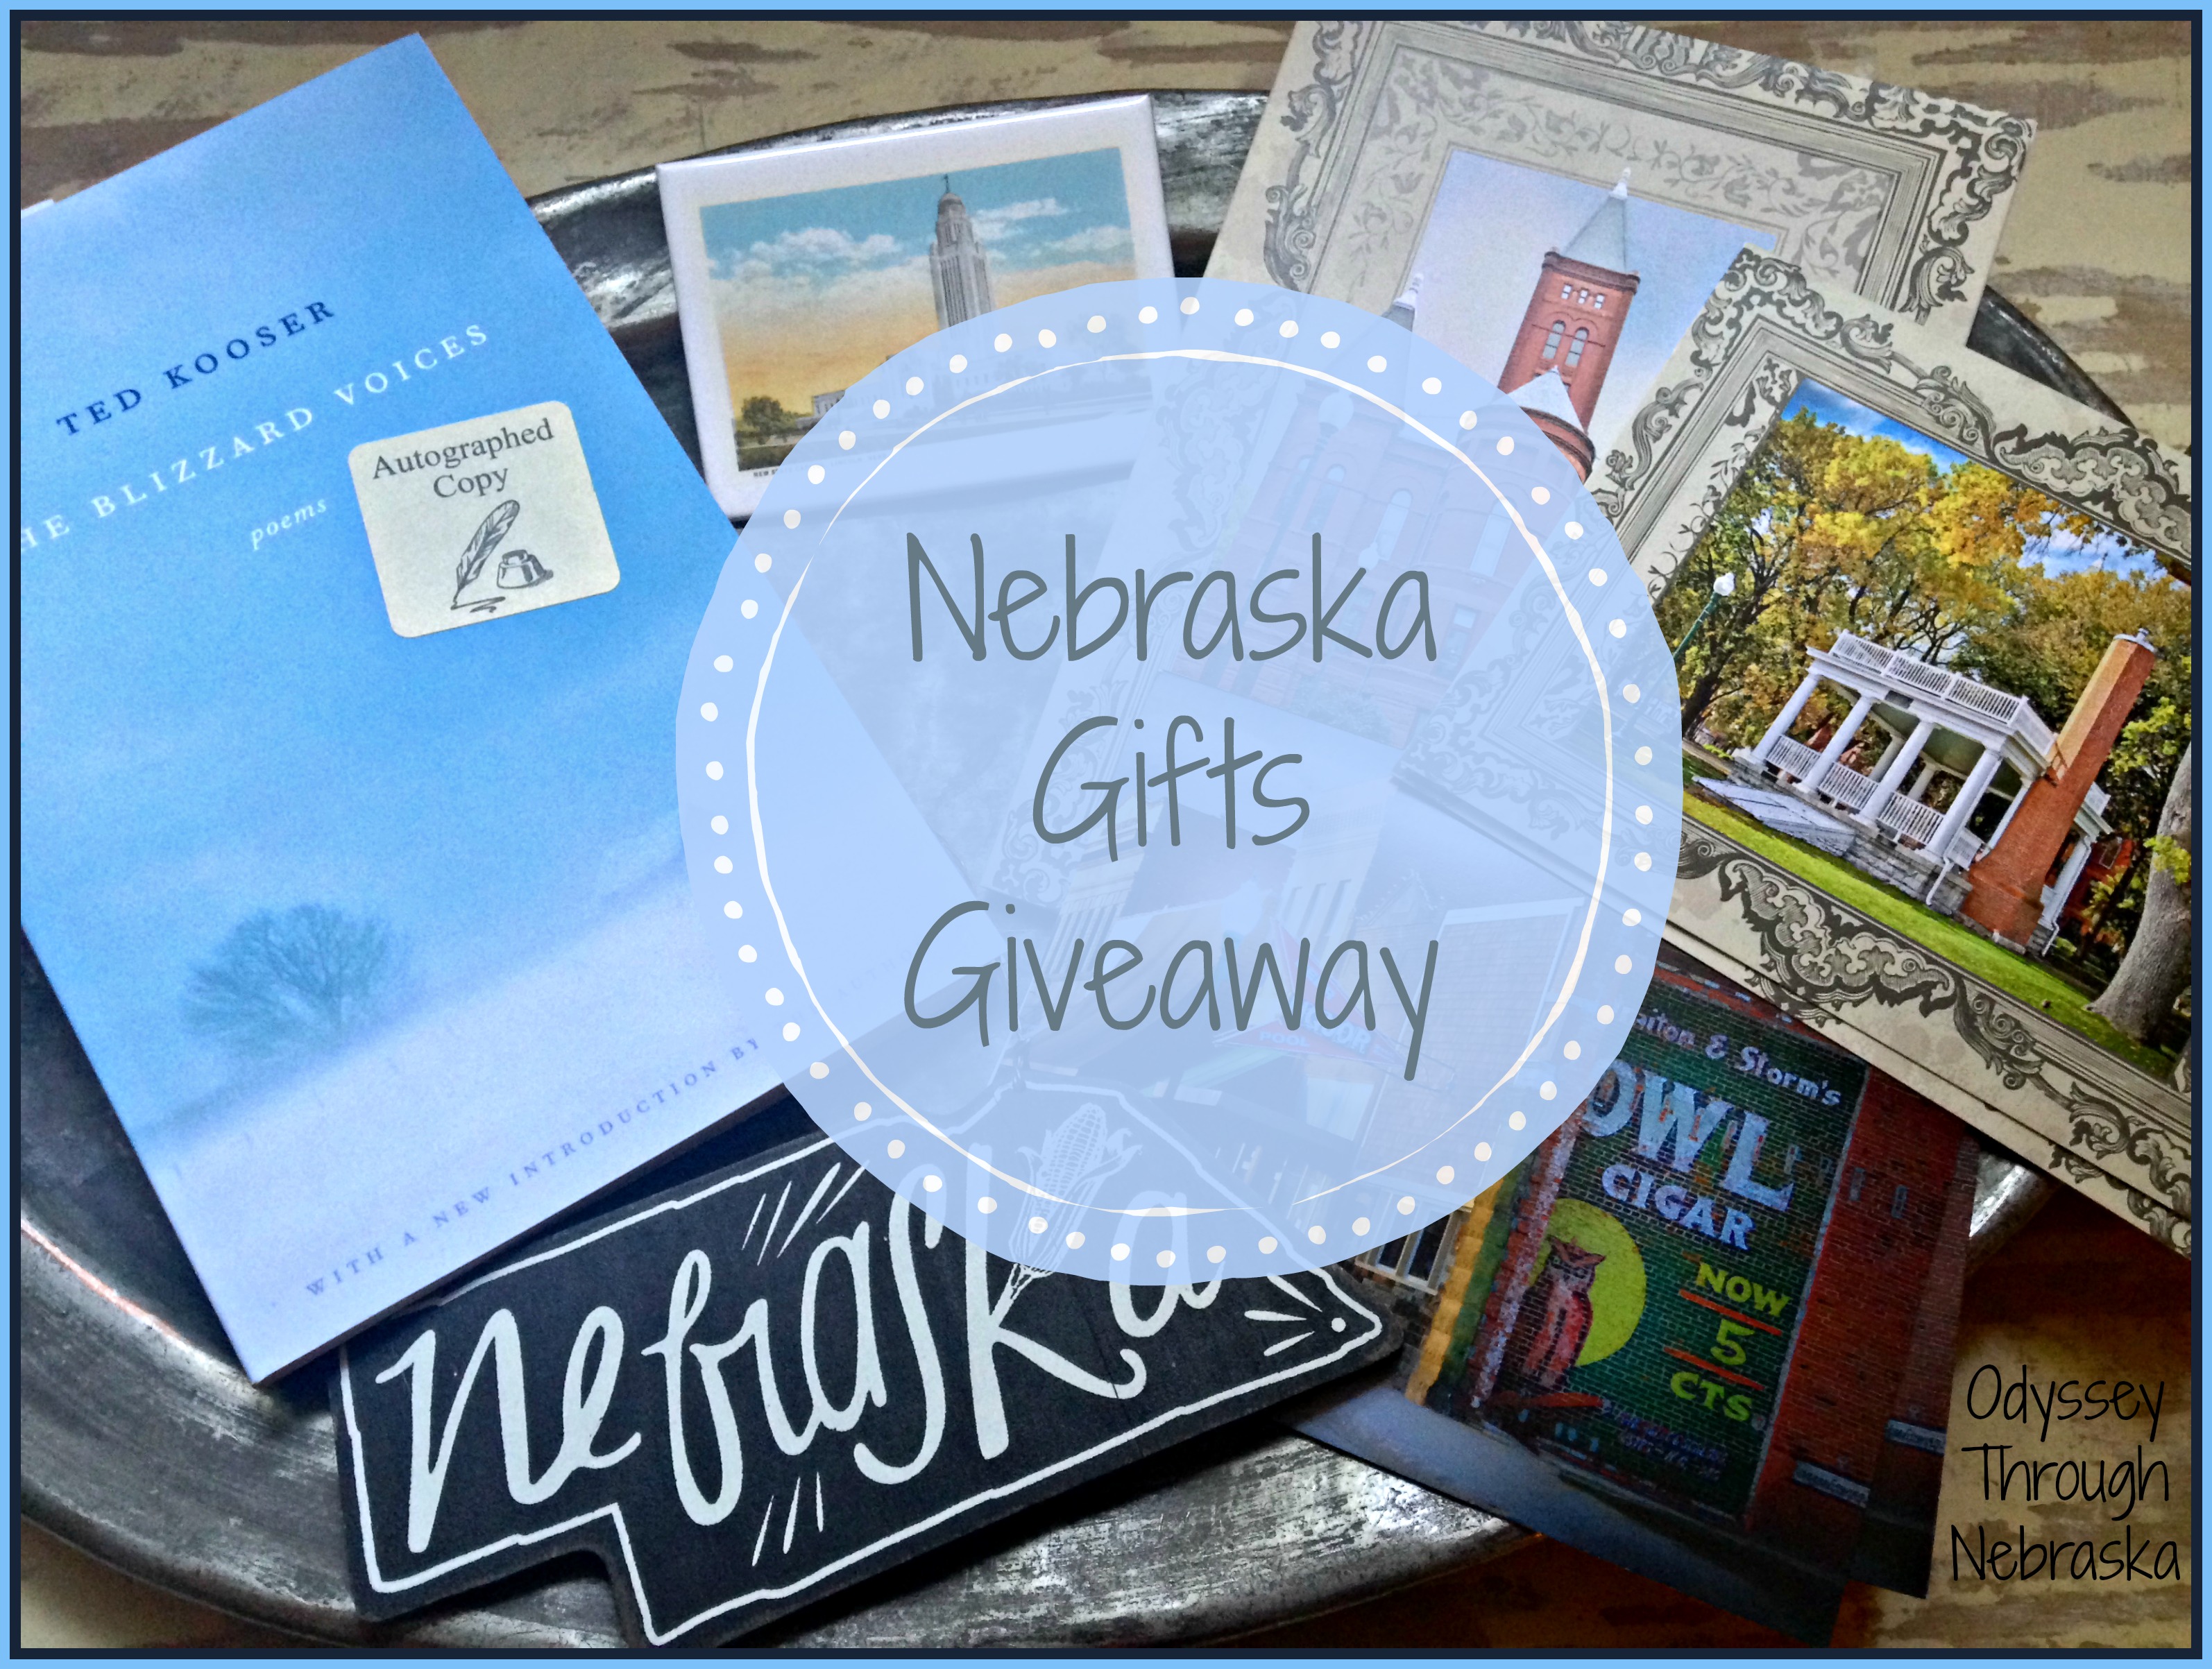 The gifts in this giveaway all represent Nebraska